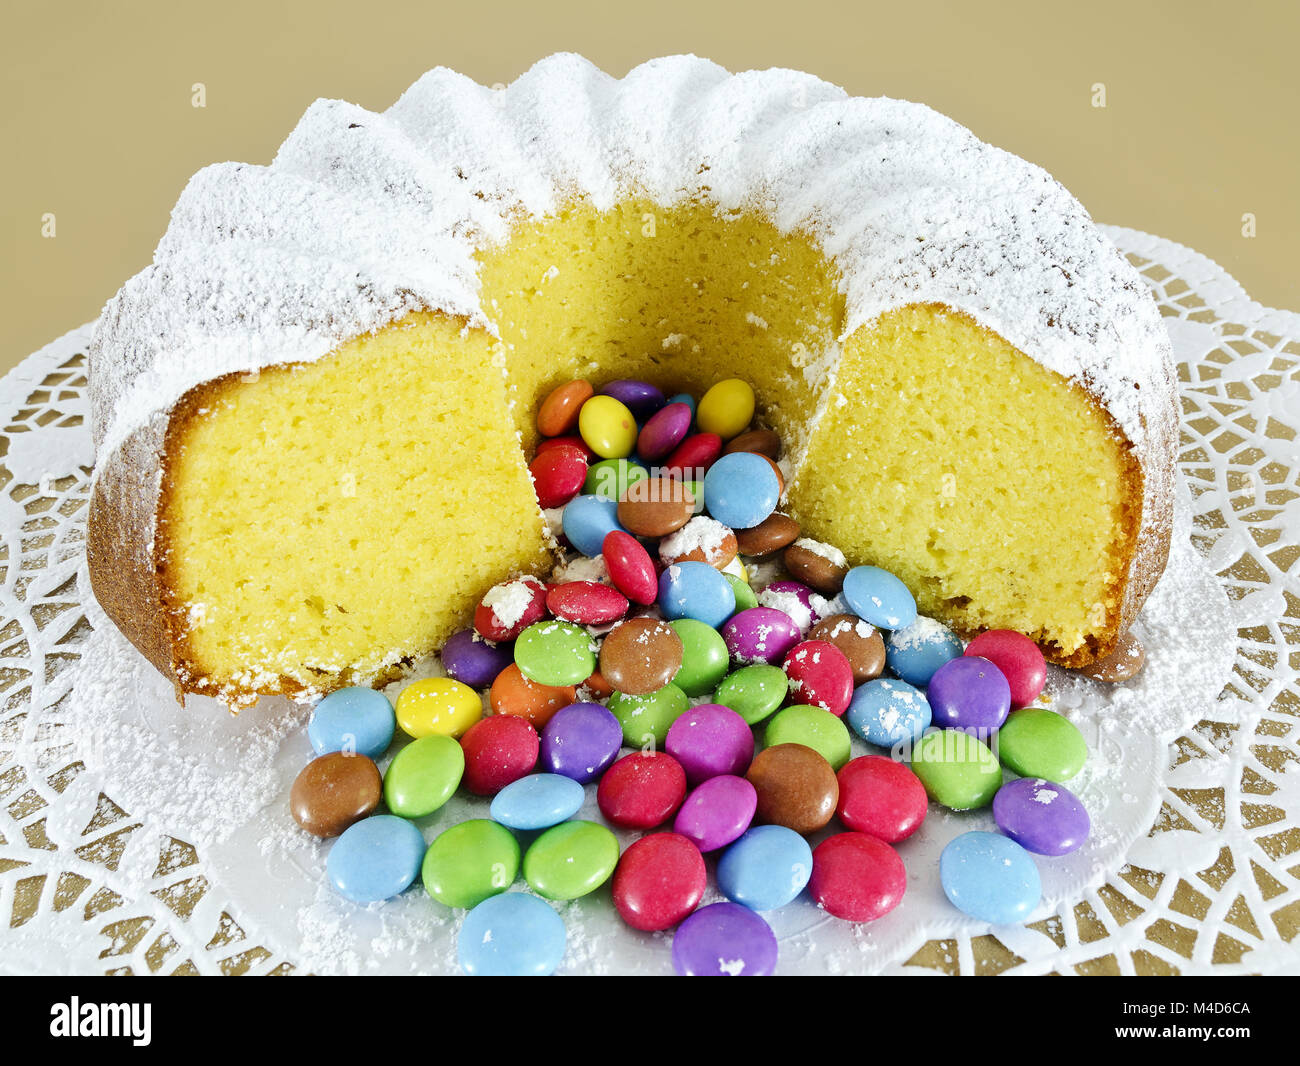 ring-shaped sponge cake and colour-varied sugar-coated chocolate confectionery Stock Photo